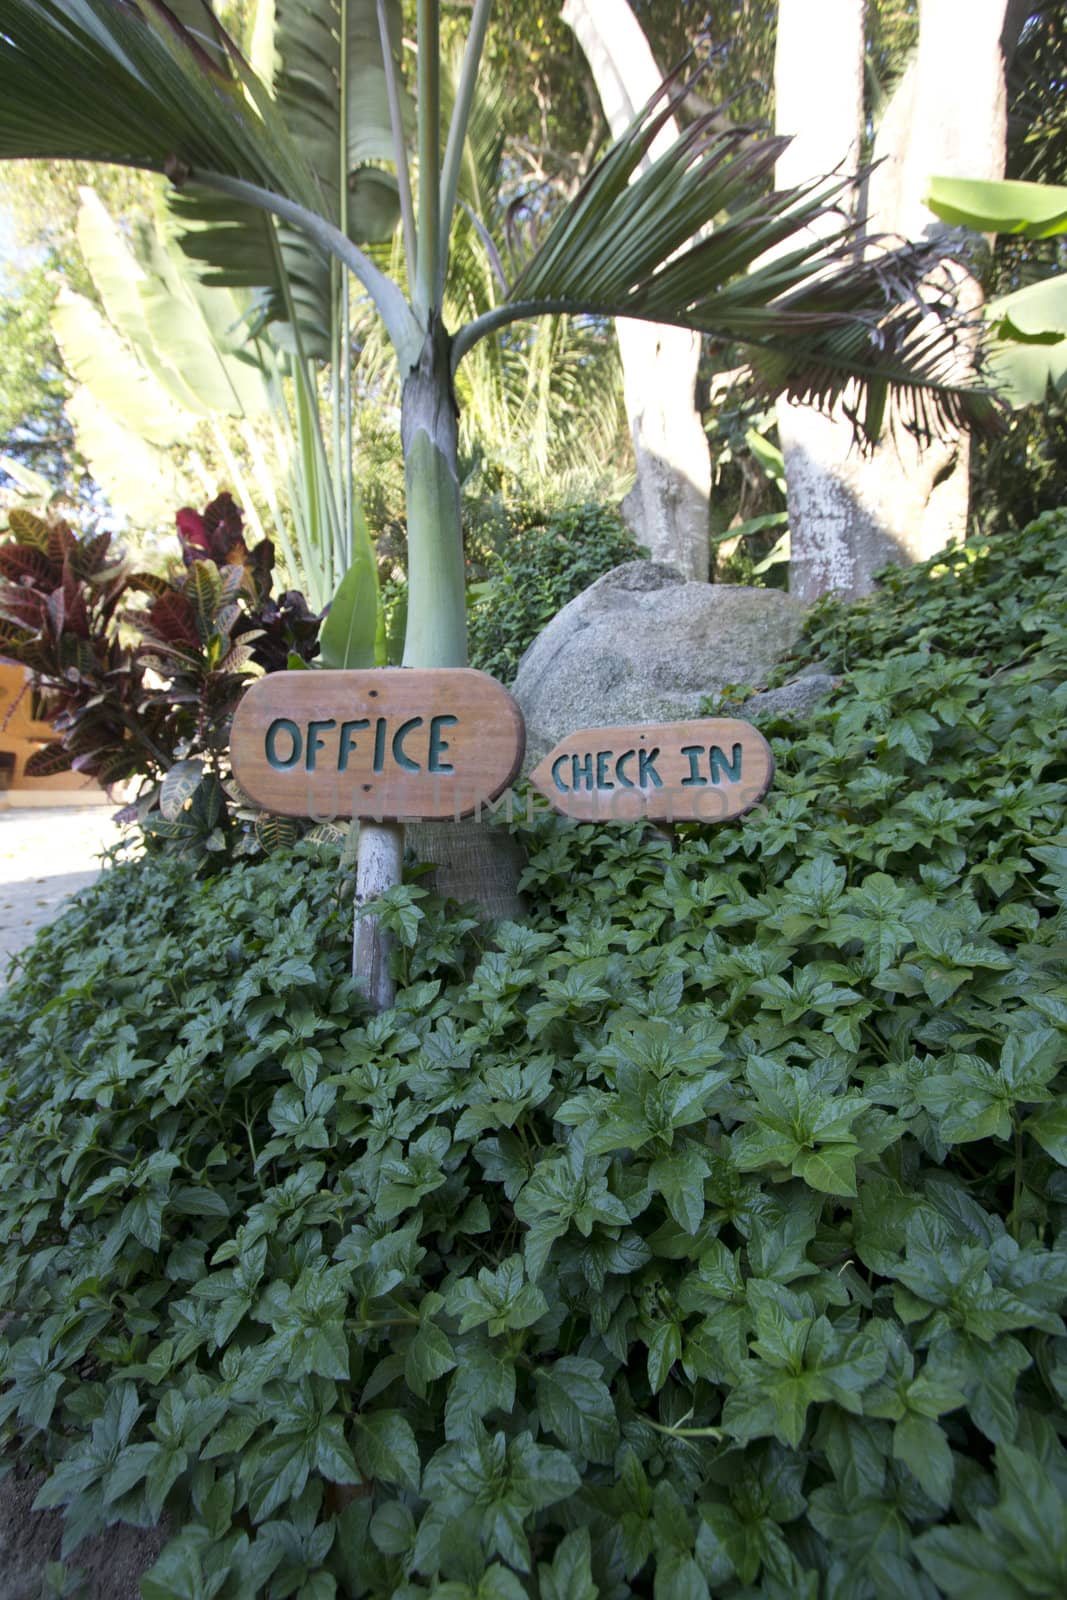 Tropical resort with office check in sign by jeremywhat